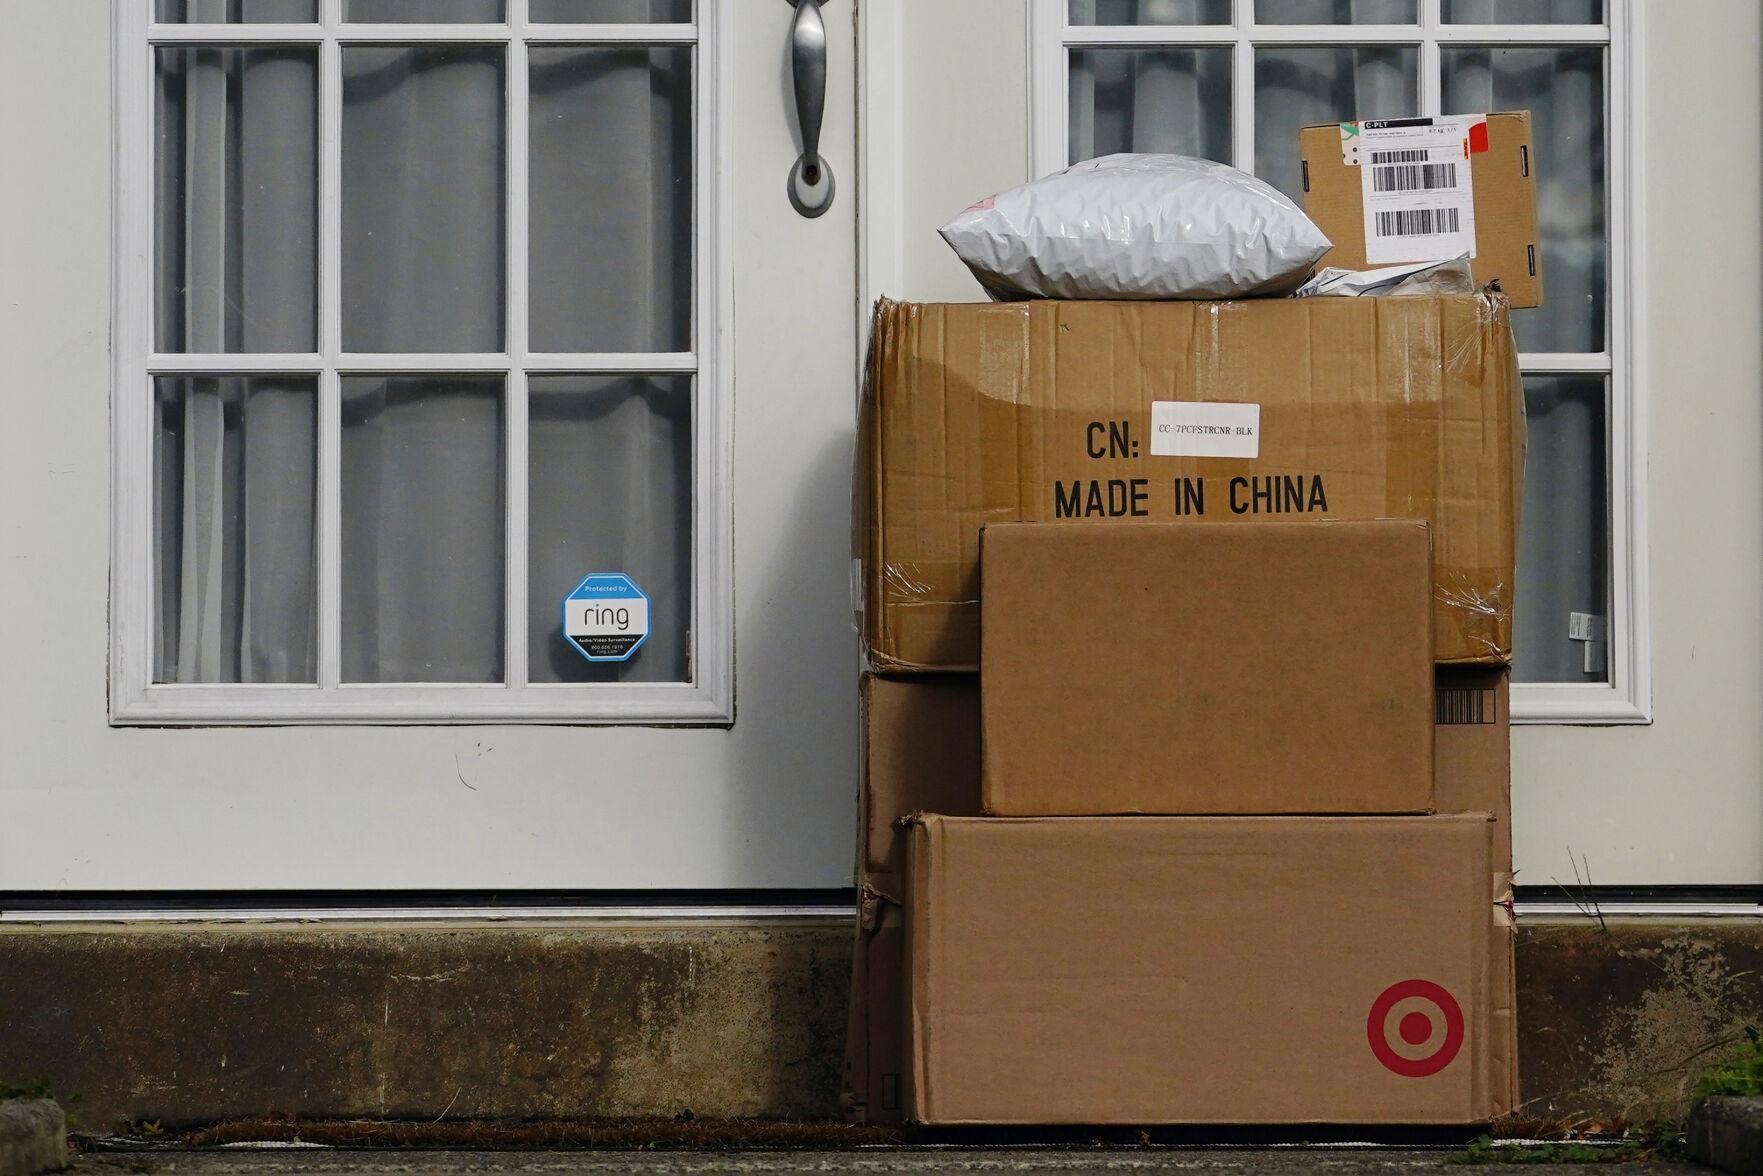 <p>File - Packages are stacked on the doorstep of a home on Oct. 27, 2021, in Upper Darby, Pa. Retailers and delivery companies have been trying to combat the theft of delivered packages in a variety of ways. (AP Photo/Matt Slocum, File)</p>   PHOTO CREDIT: Matt Slocum 